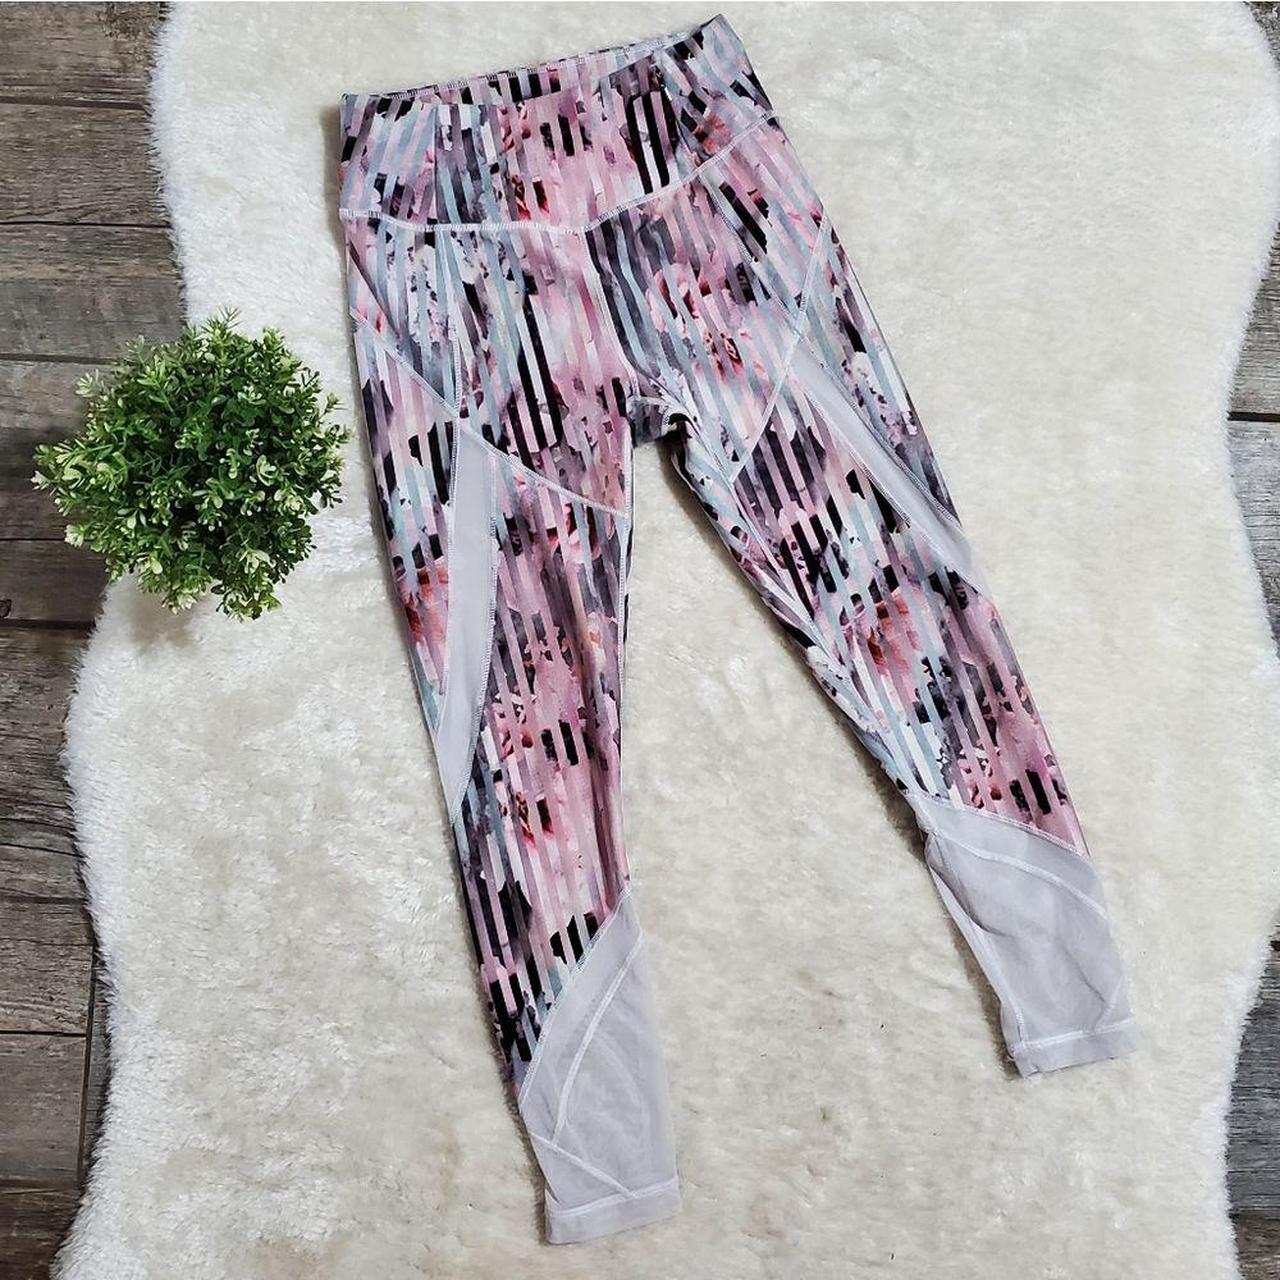 Calia by Carrie Underwood Gray Leggings with Pink Mesh